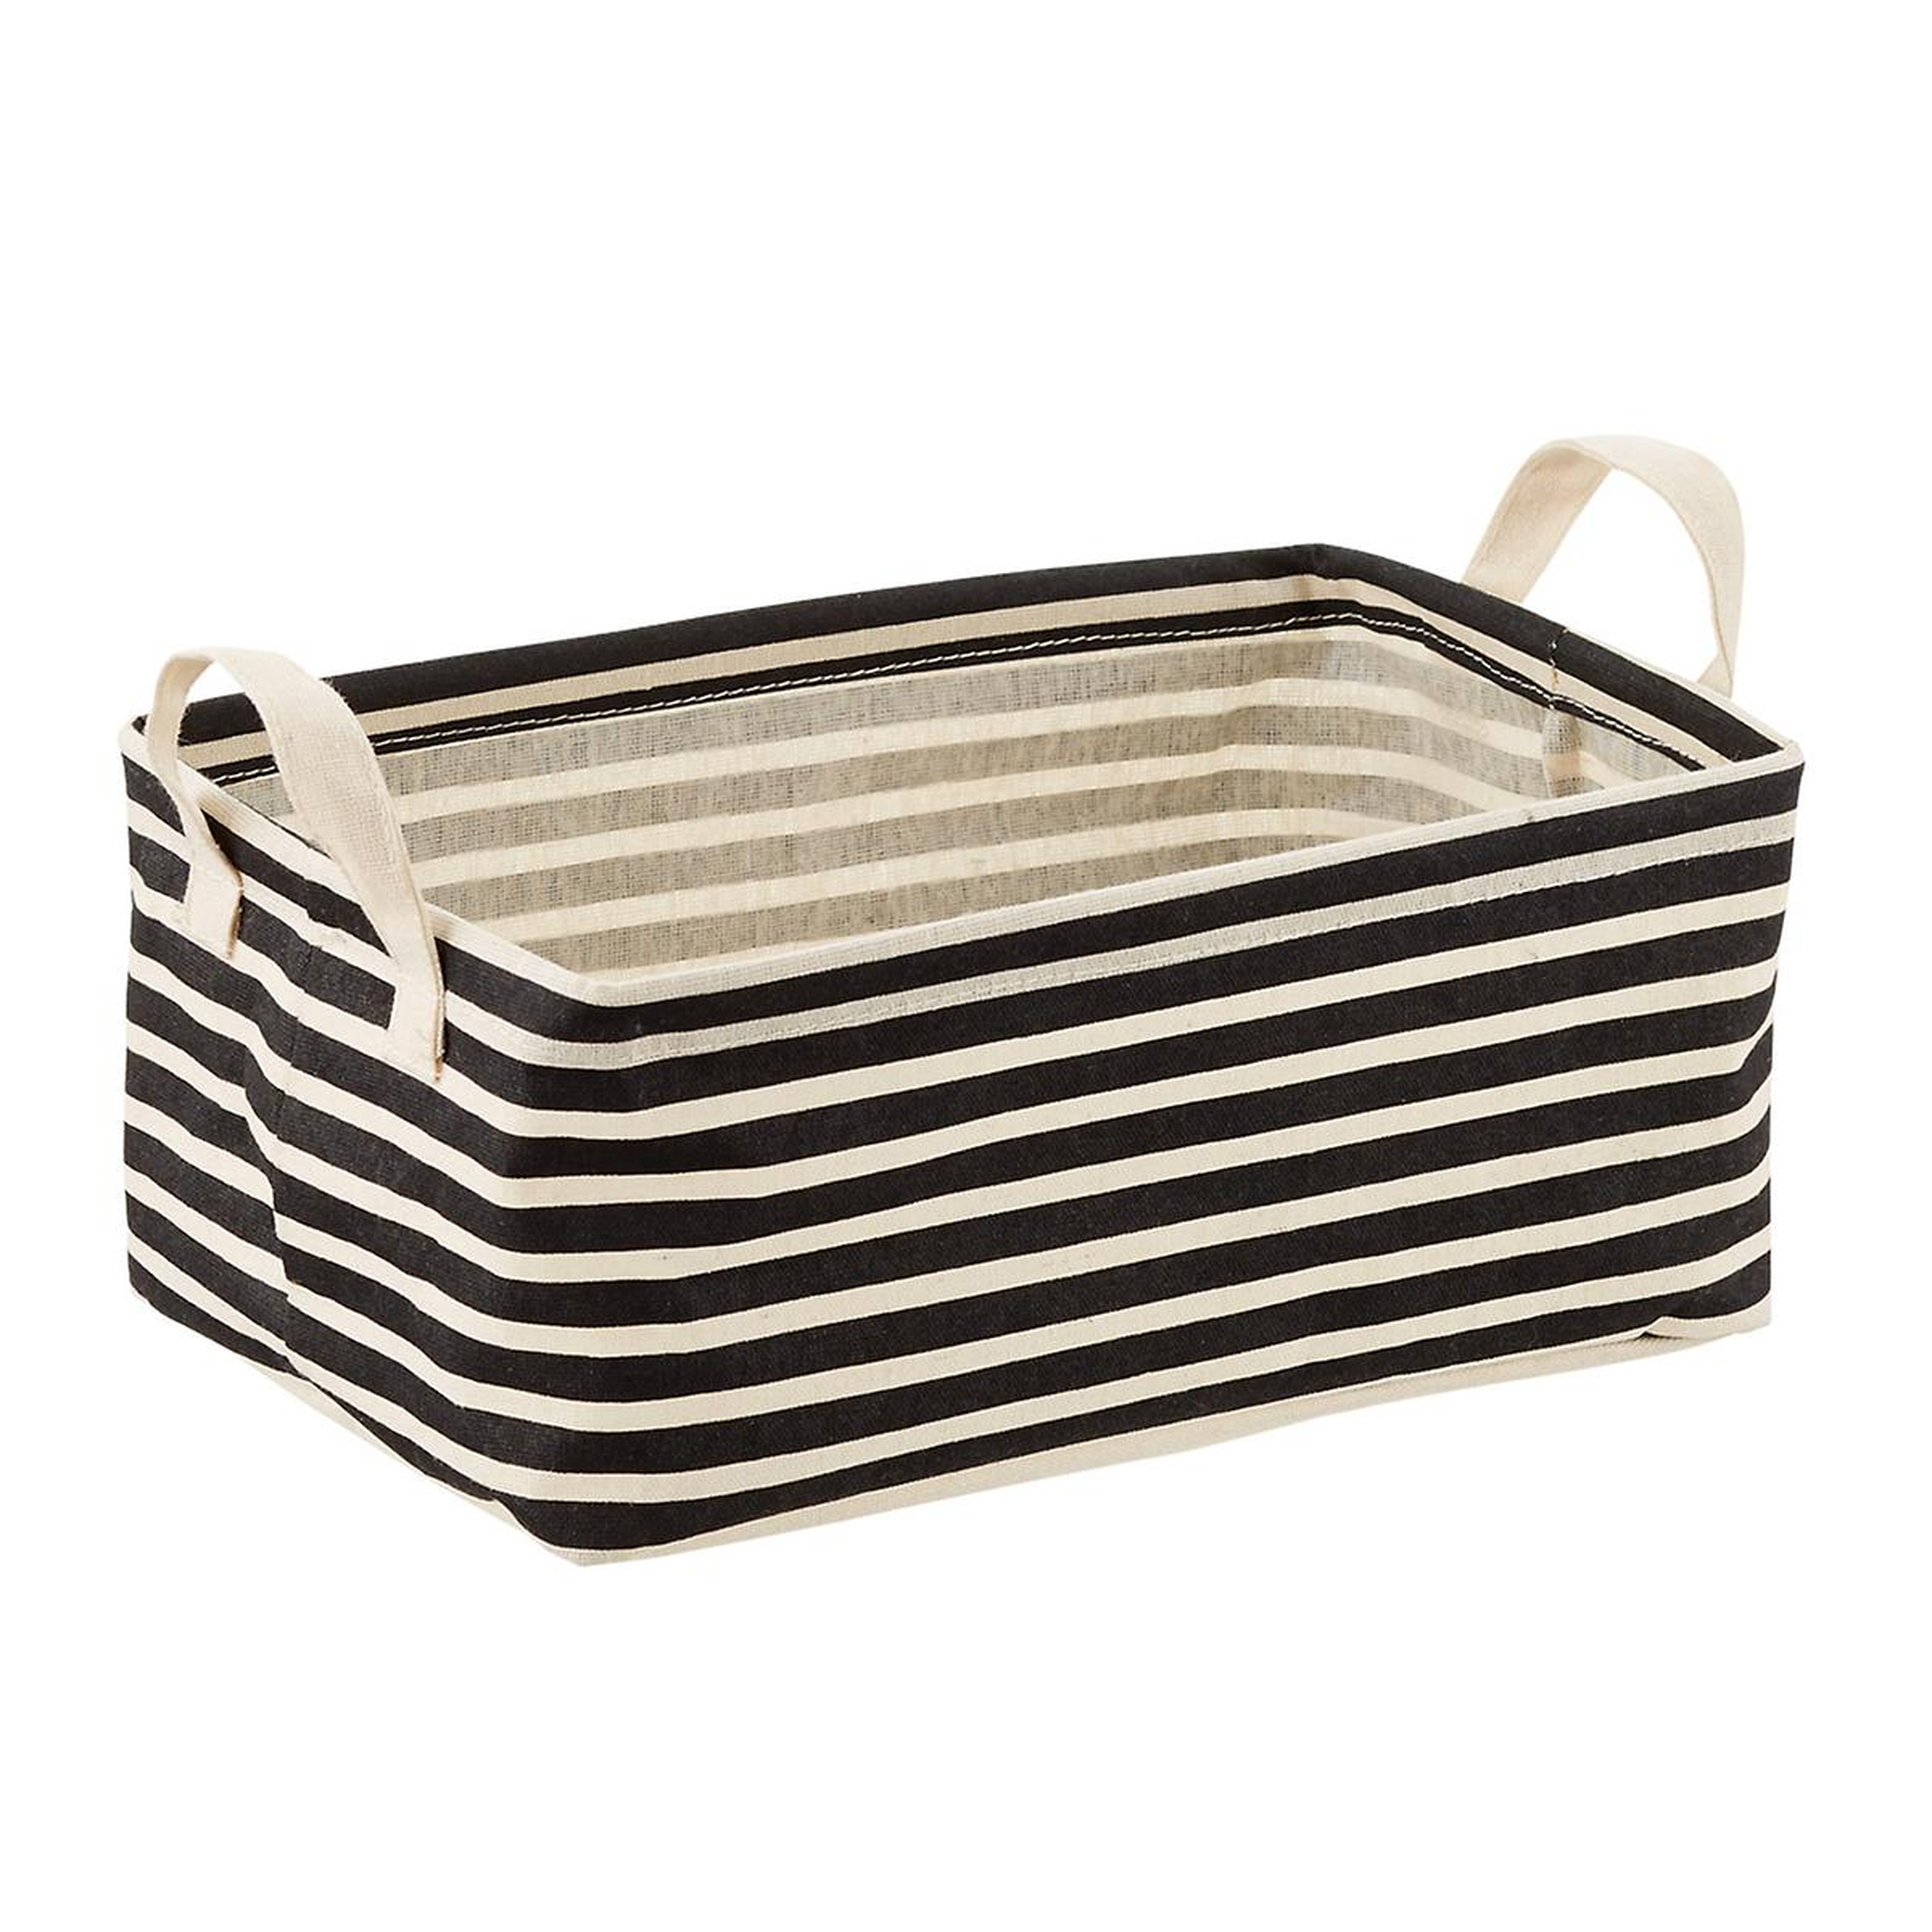 Small Black Stripes Fabric Storage Bin w/Handles Natural - containerstore.com